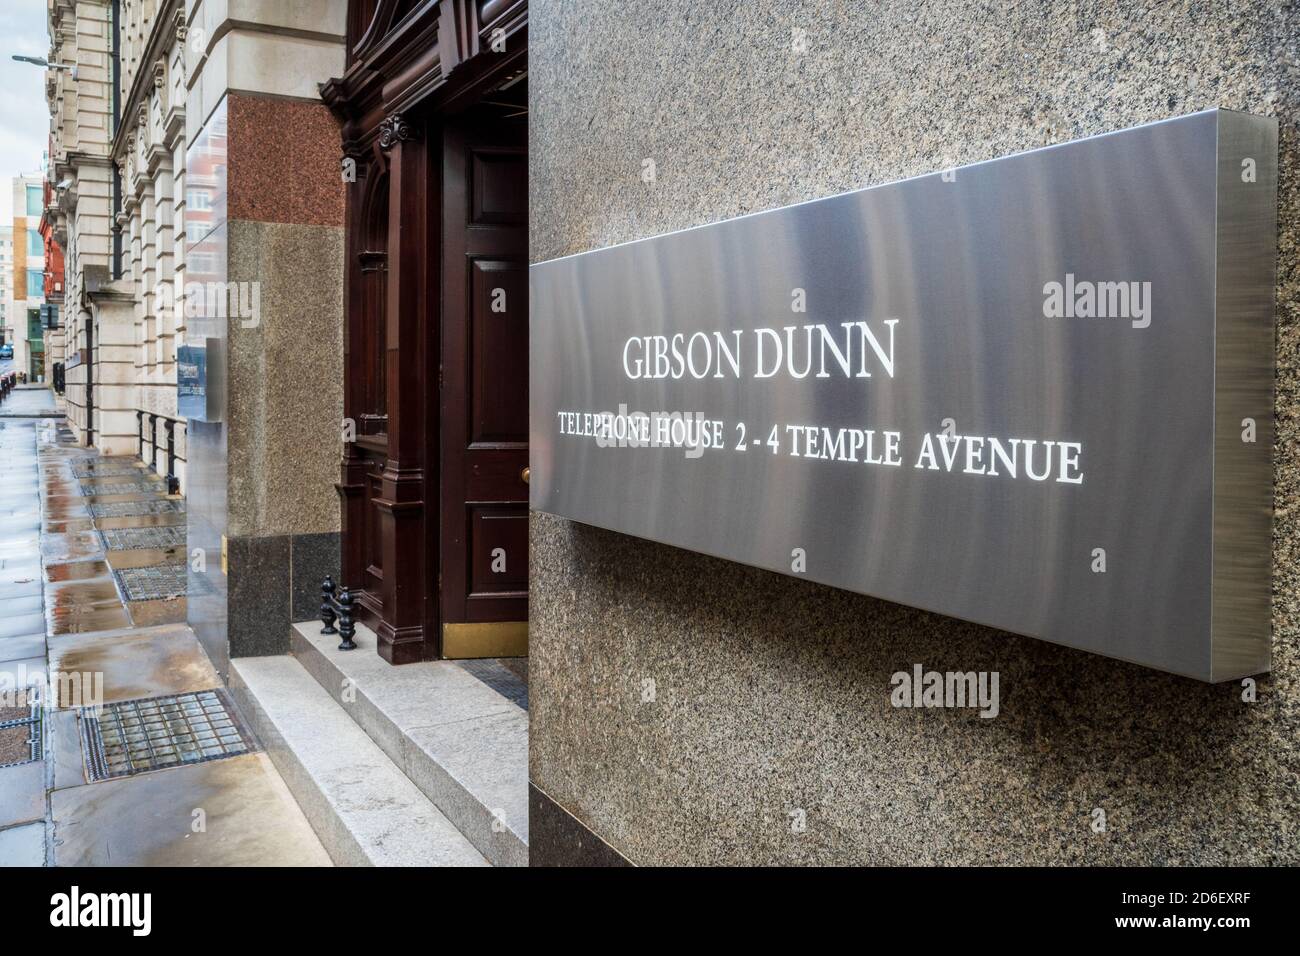 Gibson Dunn International Law Firm London Offices. Los Angeles based global Law firm, founded 1890. Gibson, Dunn & Crutcher LLP. Stock Photo